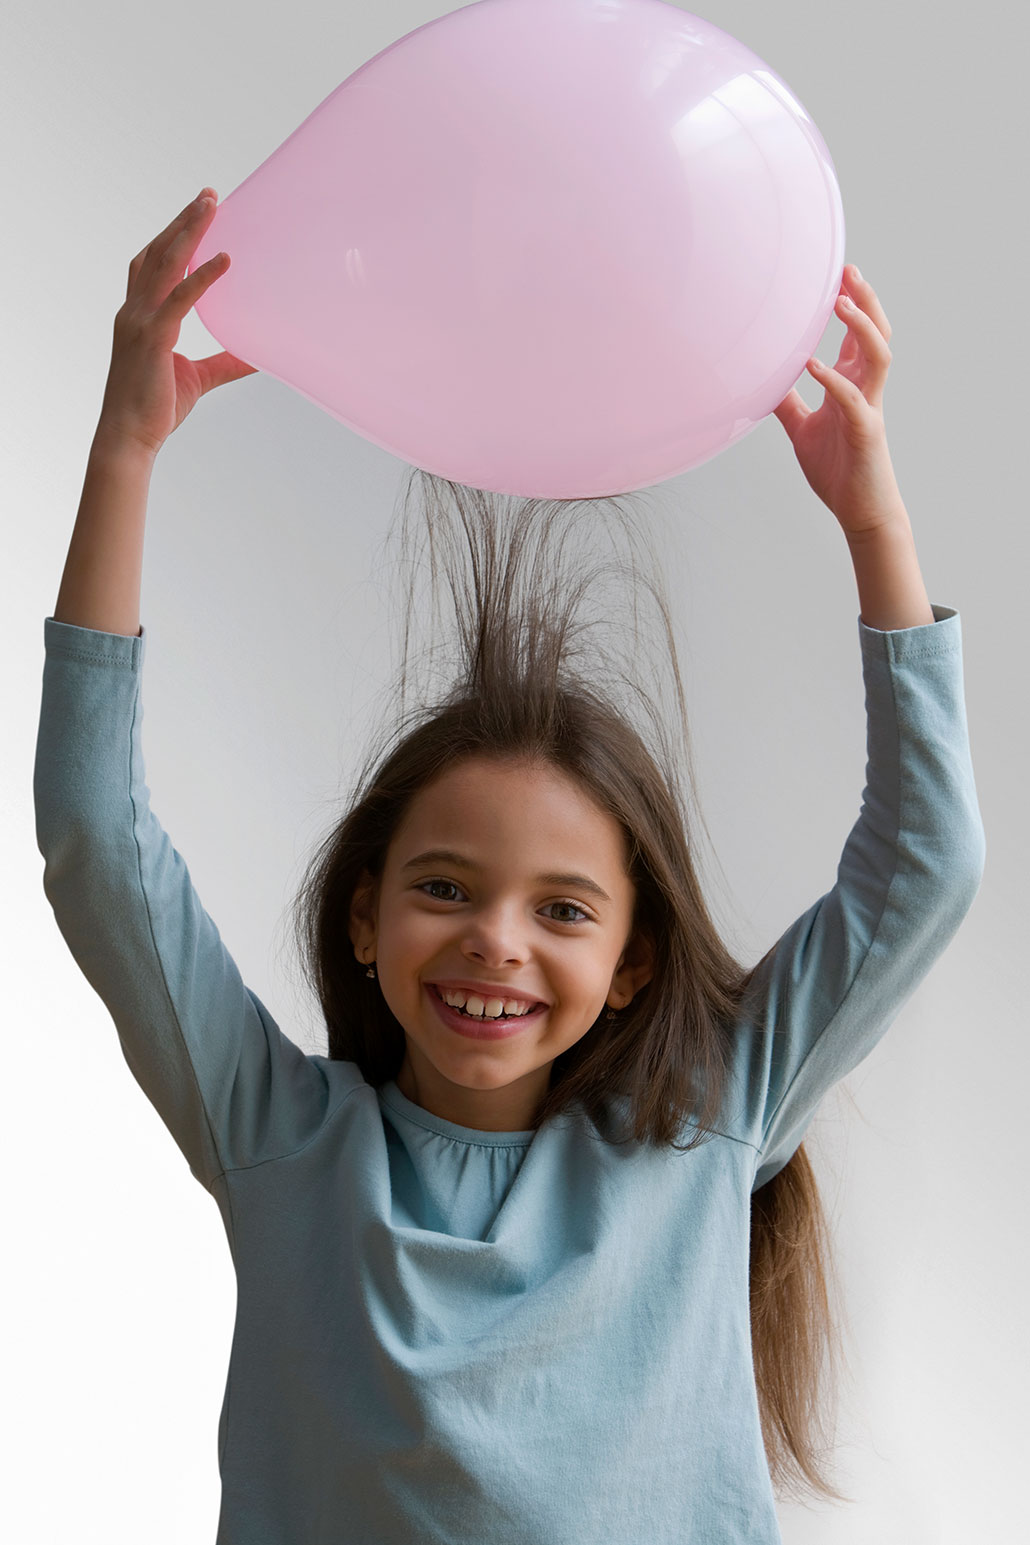 a girl holding a pink balloon above her head showin ghow it makes her hair stand up